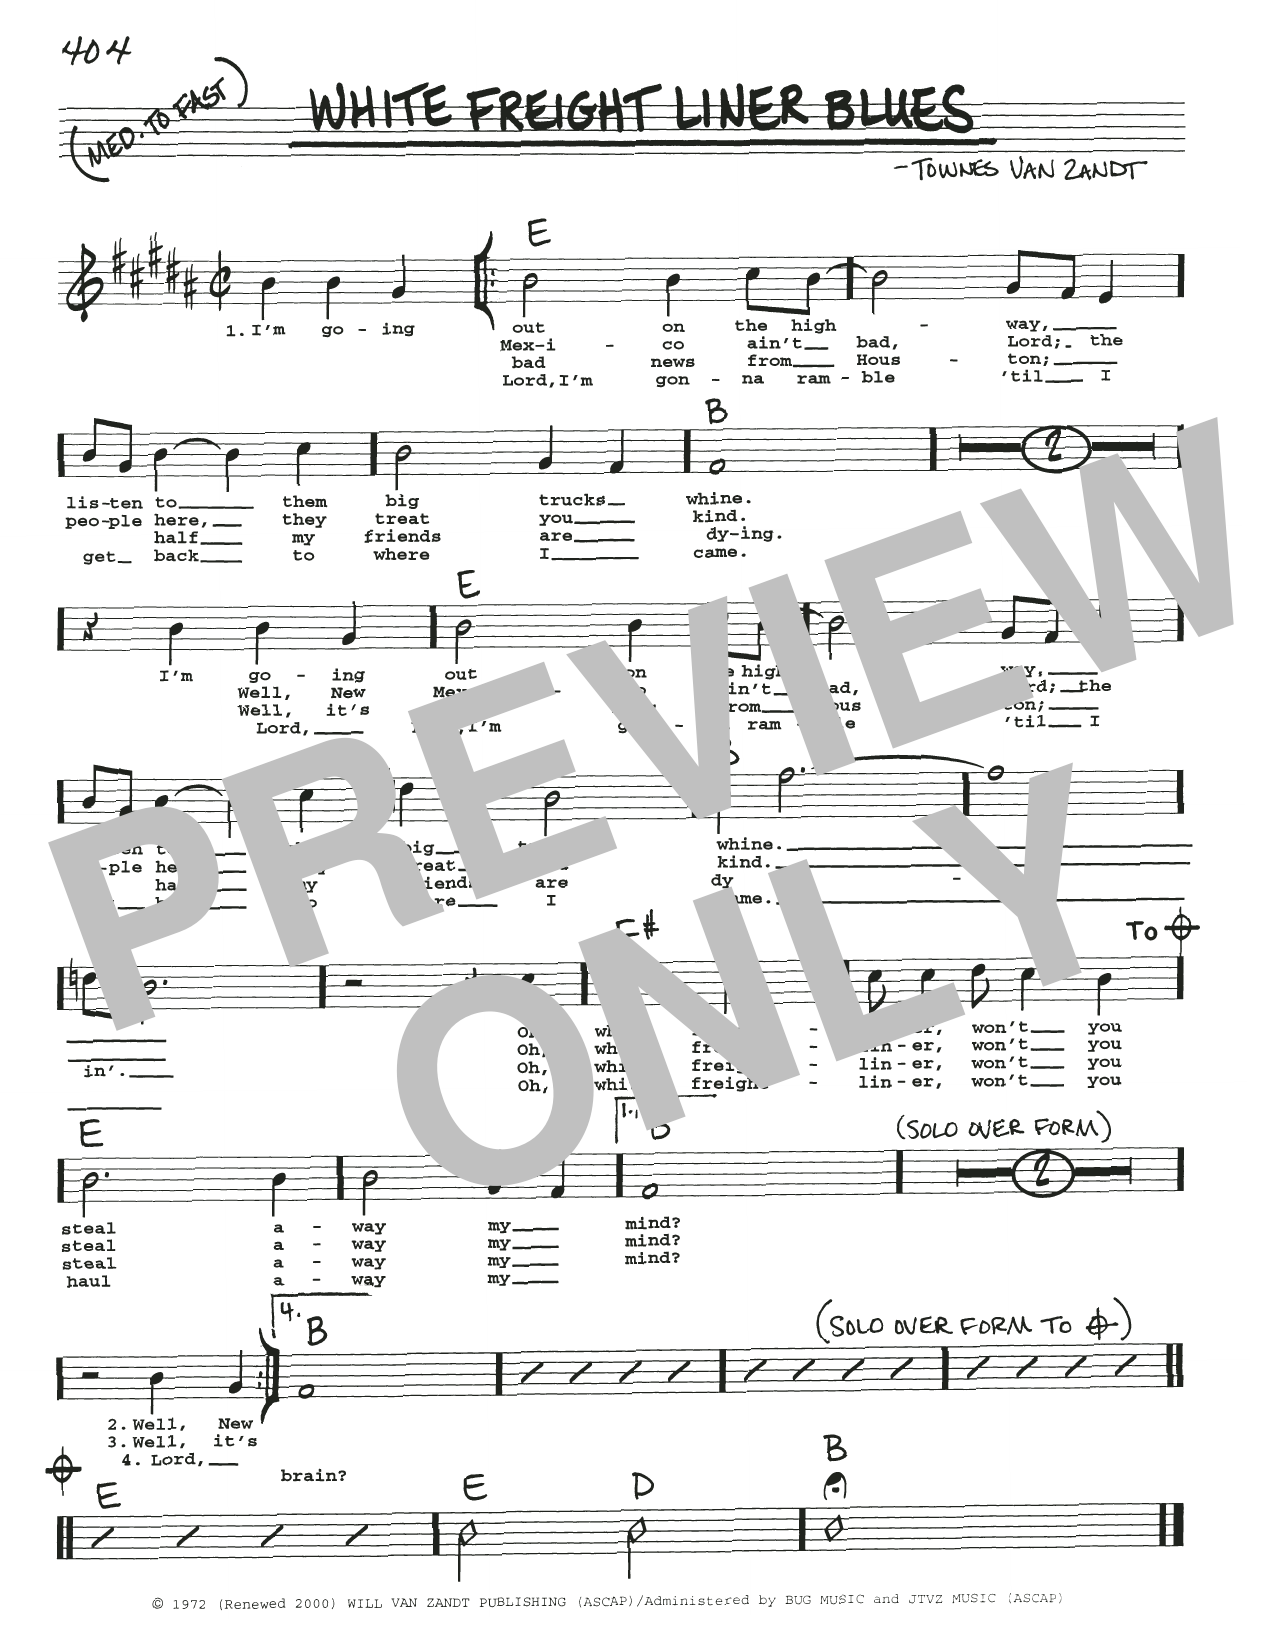 Download Townes Van Zandt White Freight Liner Blues Sheet Music